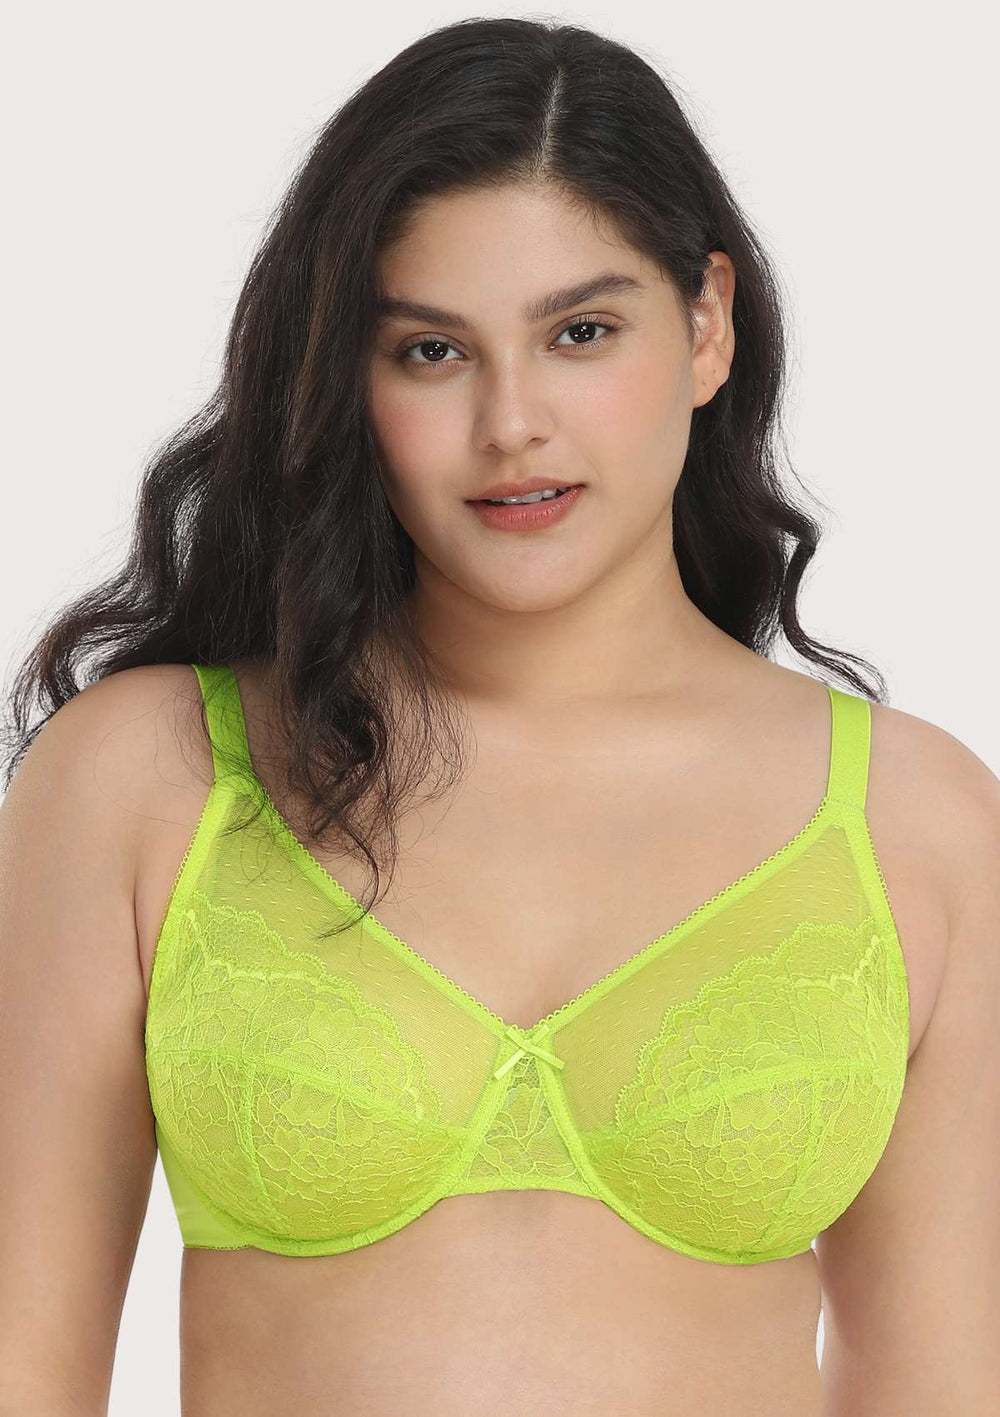 Zyia Active Bra Women’s Extra Large Neon Lime Green Padded Bra